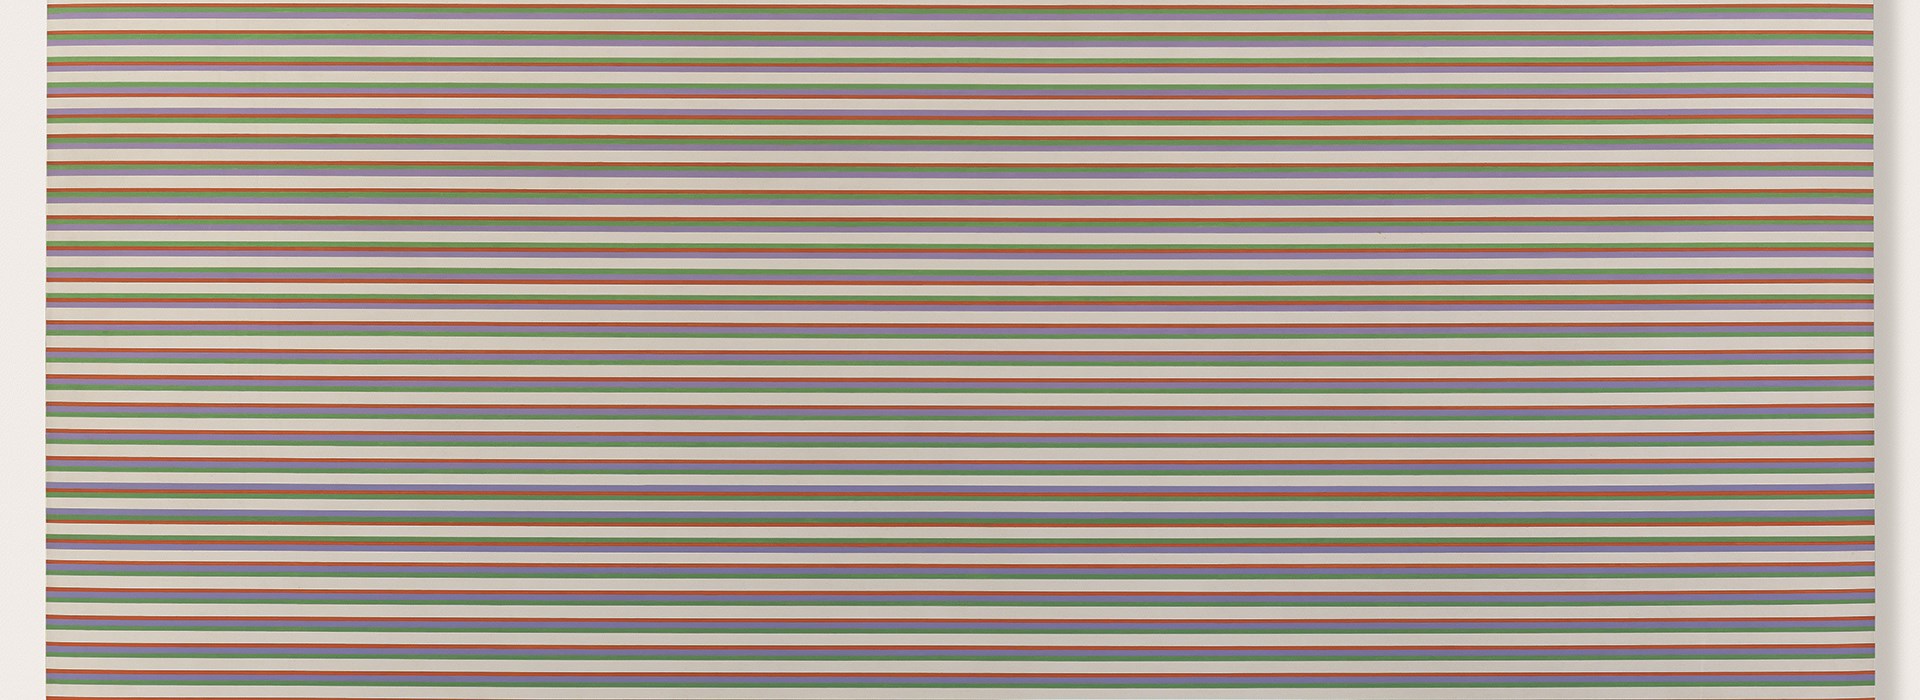 An abstract oil painting of irregularly repeating horizontal lines in cream, green, lilac and orange.